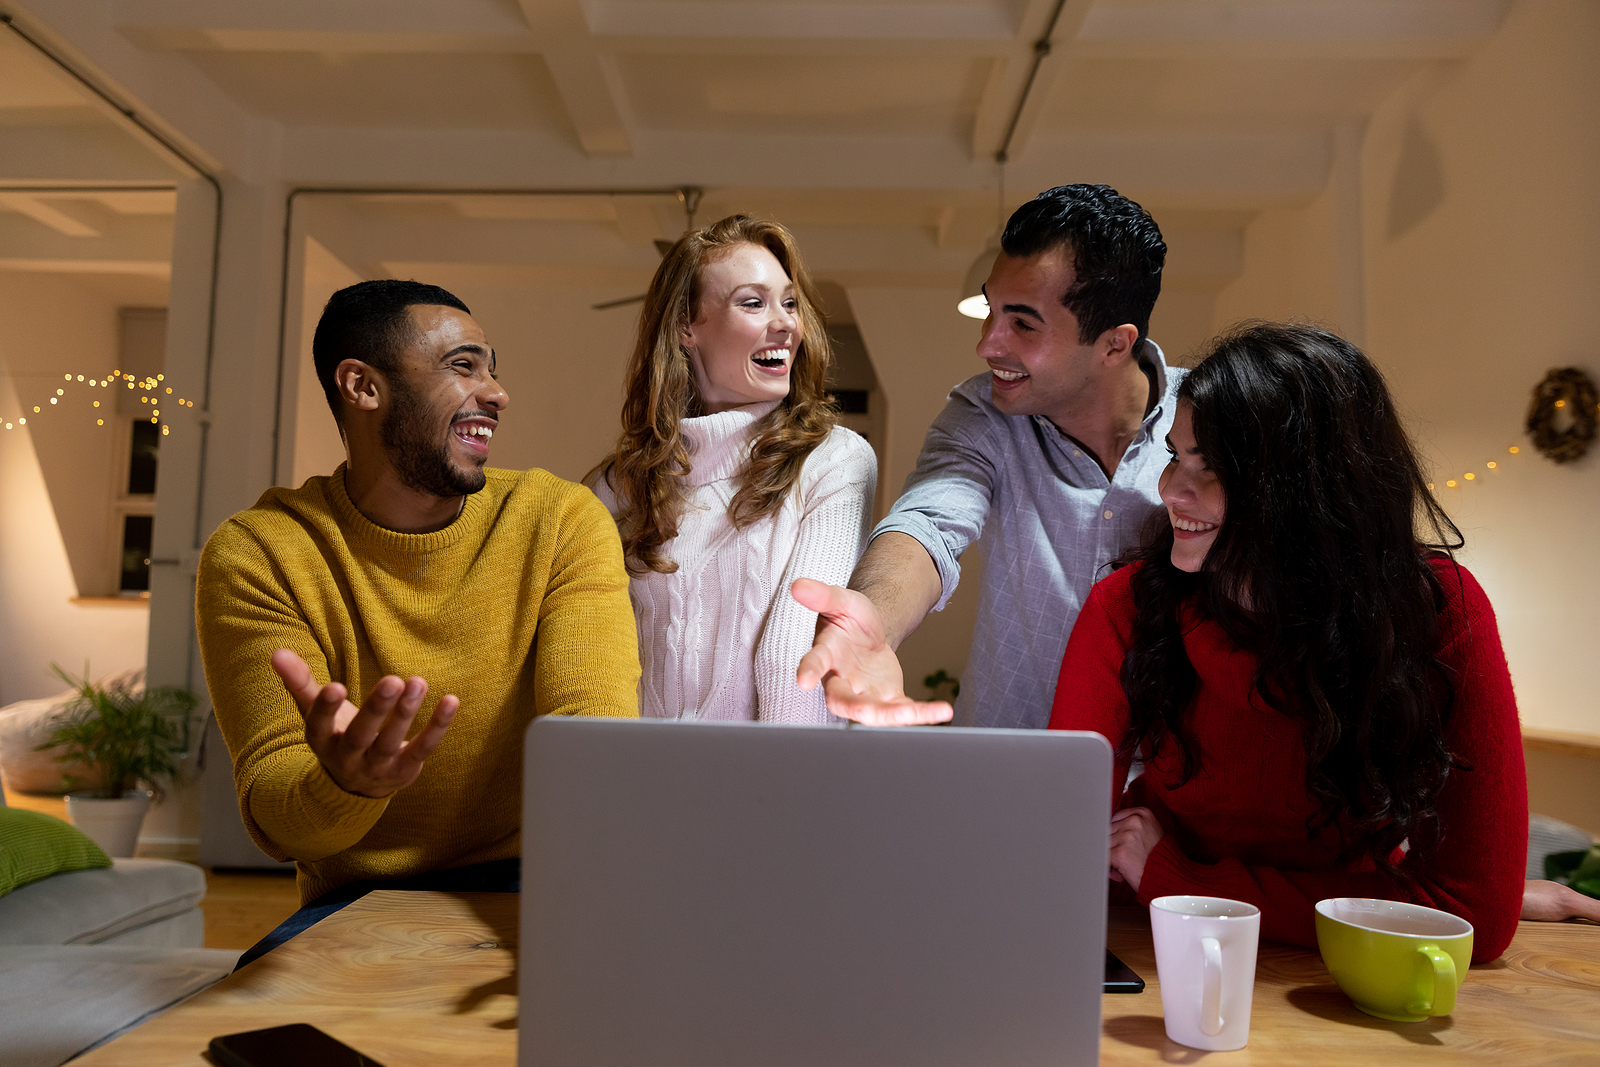 A group of four young multi-ethnic friends looking at a laptop computer together, talking and laughing in the sitting room of an apartment in the evening.